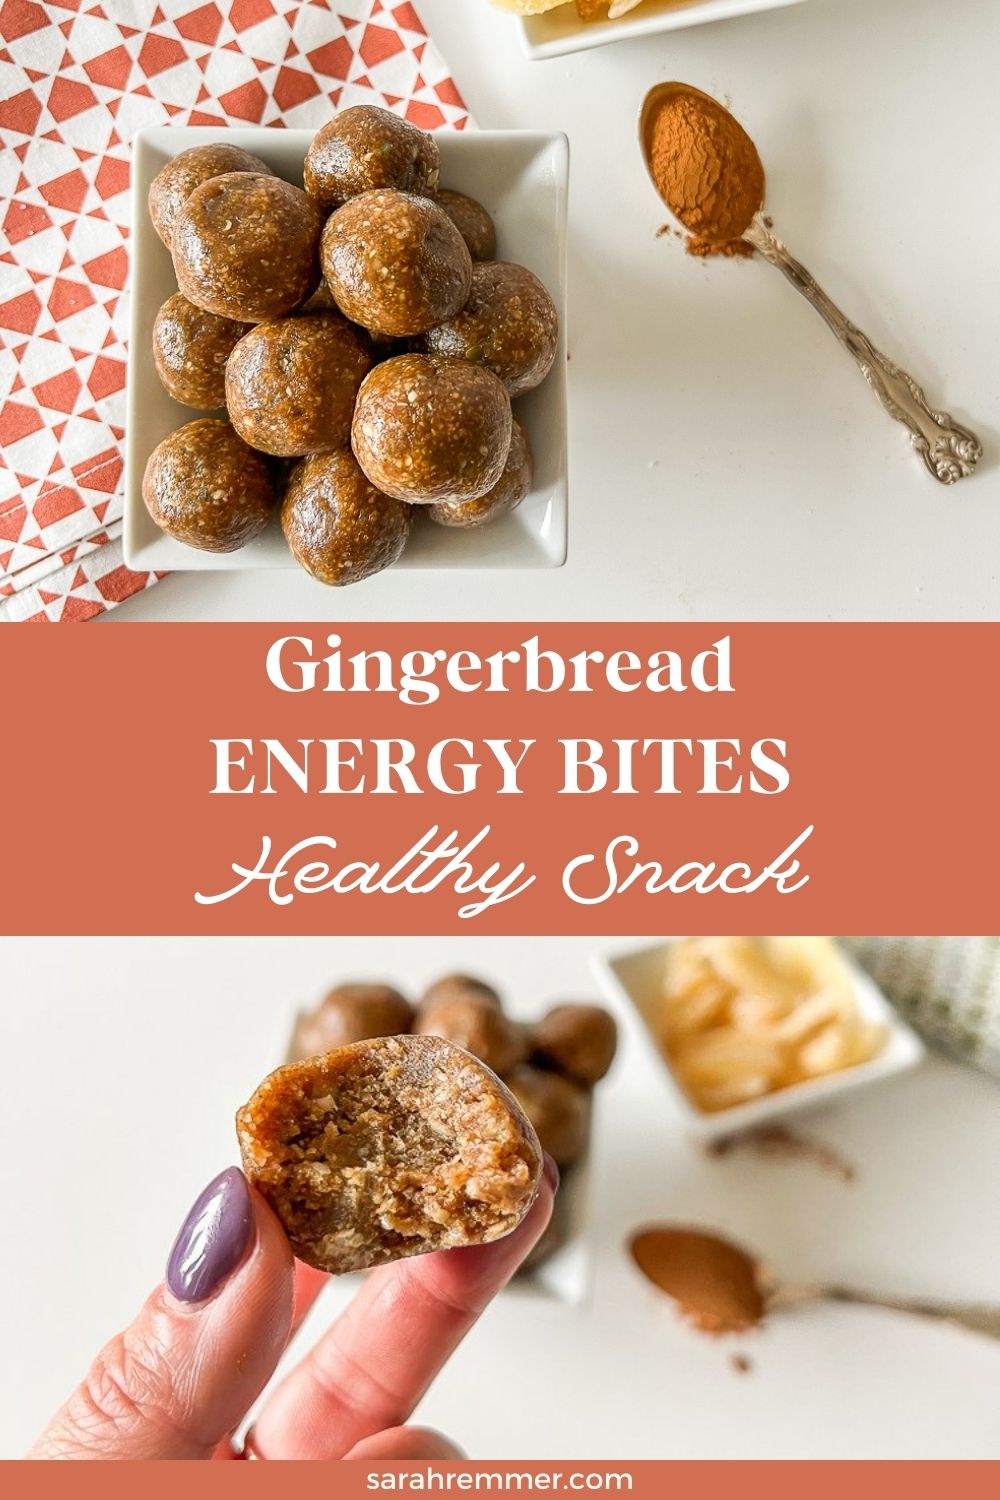 These little gingerbread energy bites are the perfect combination of sweet and spicy. You’ll love this holiday-inspired recipe!